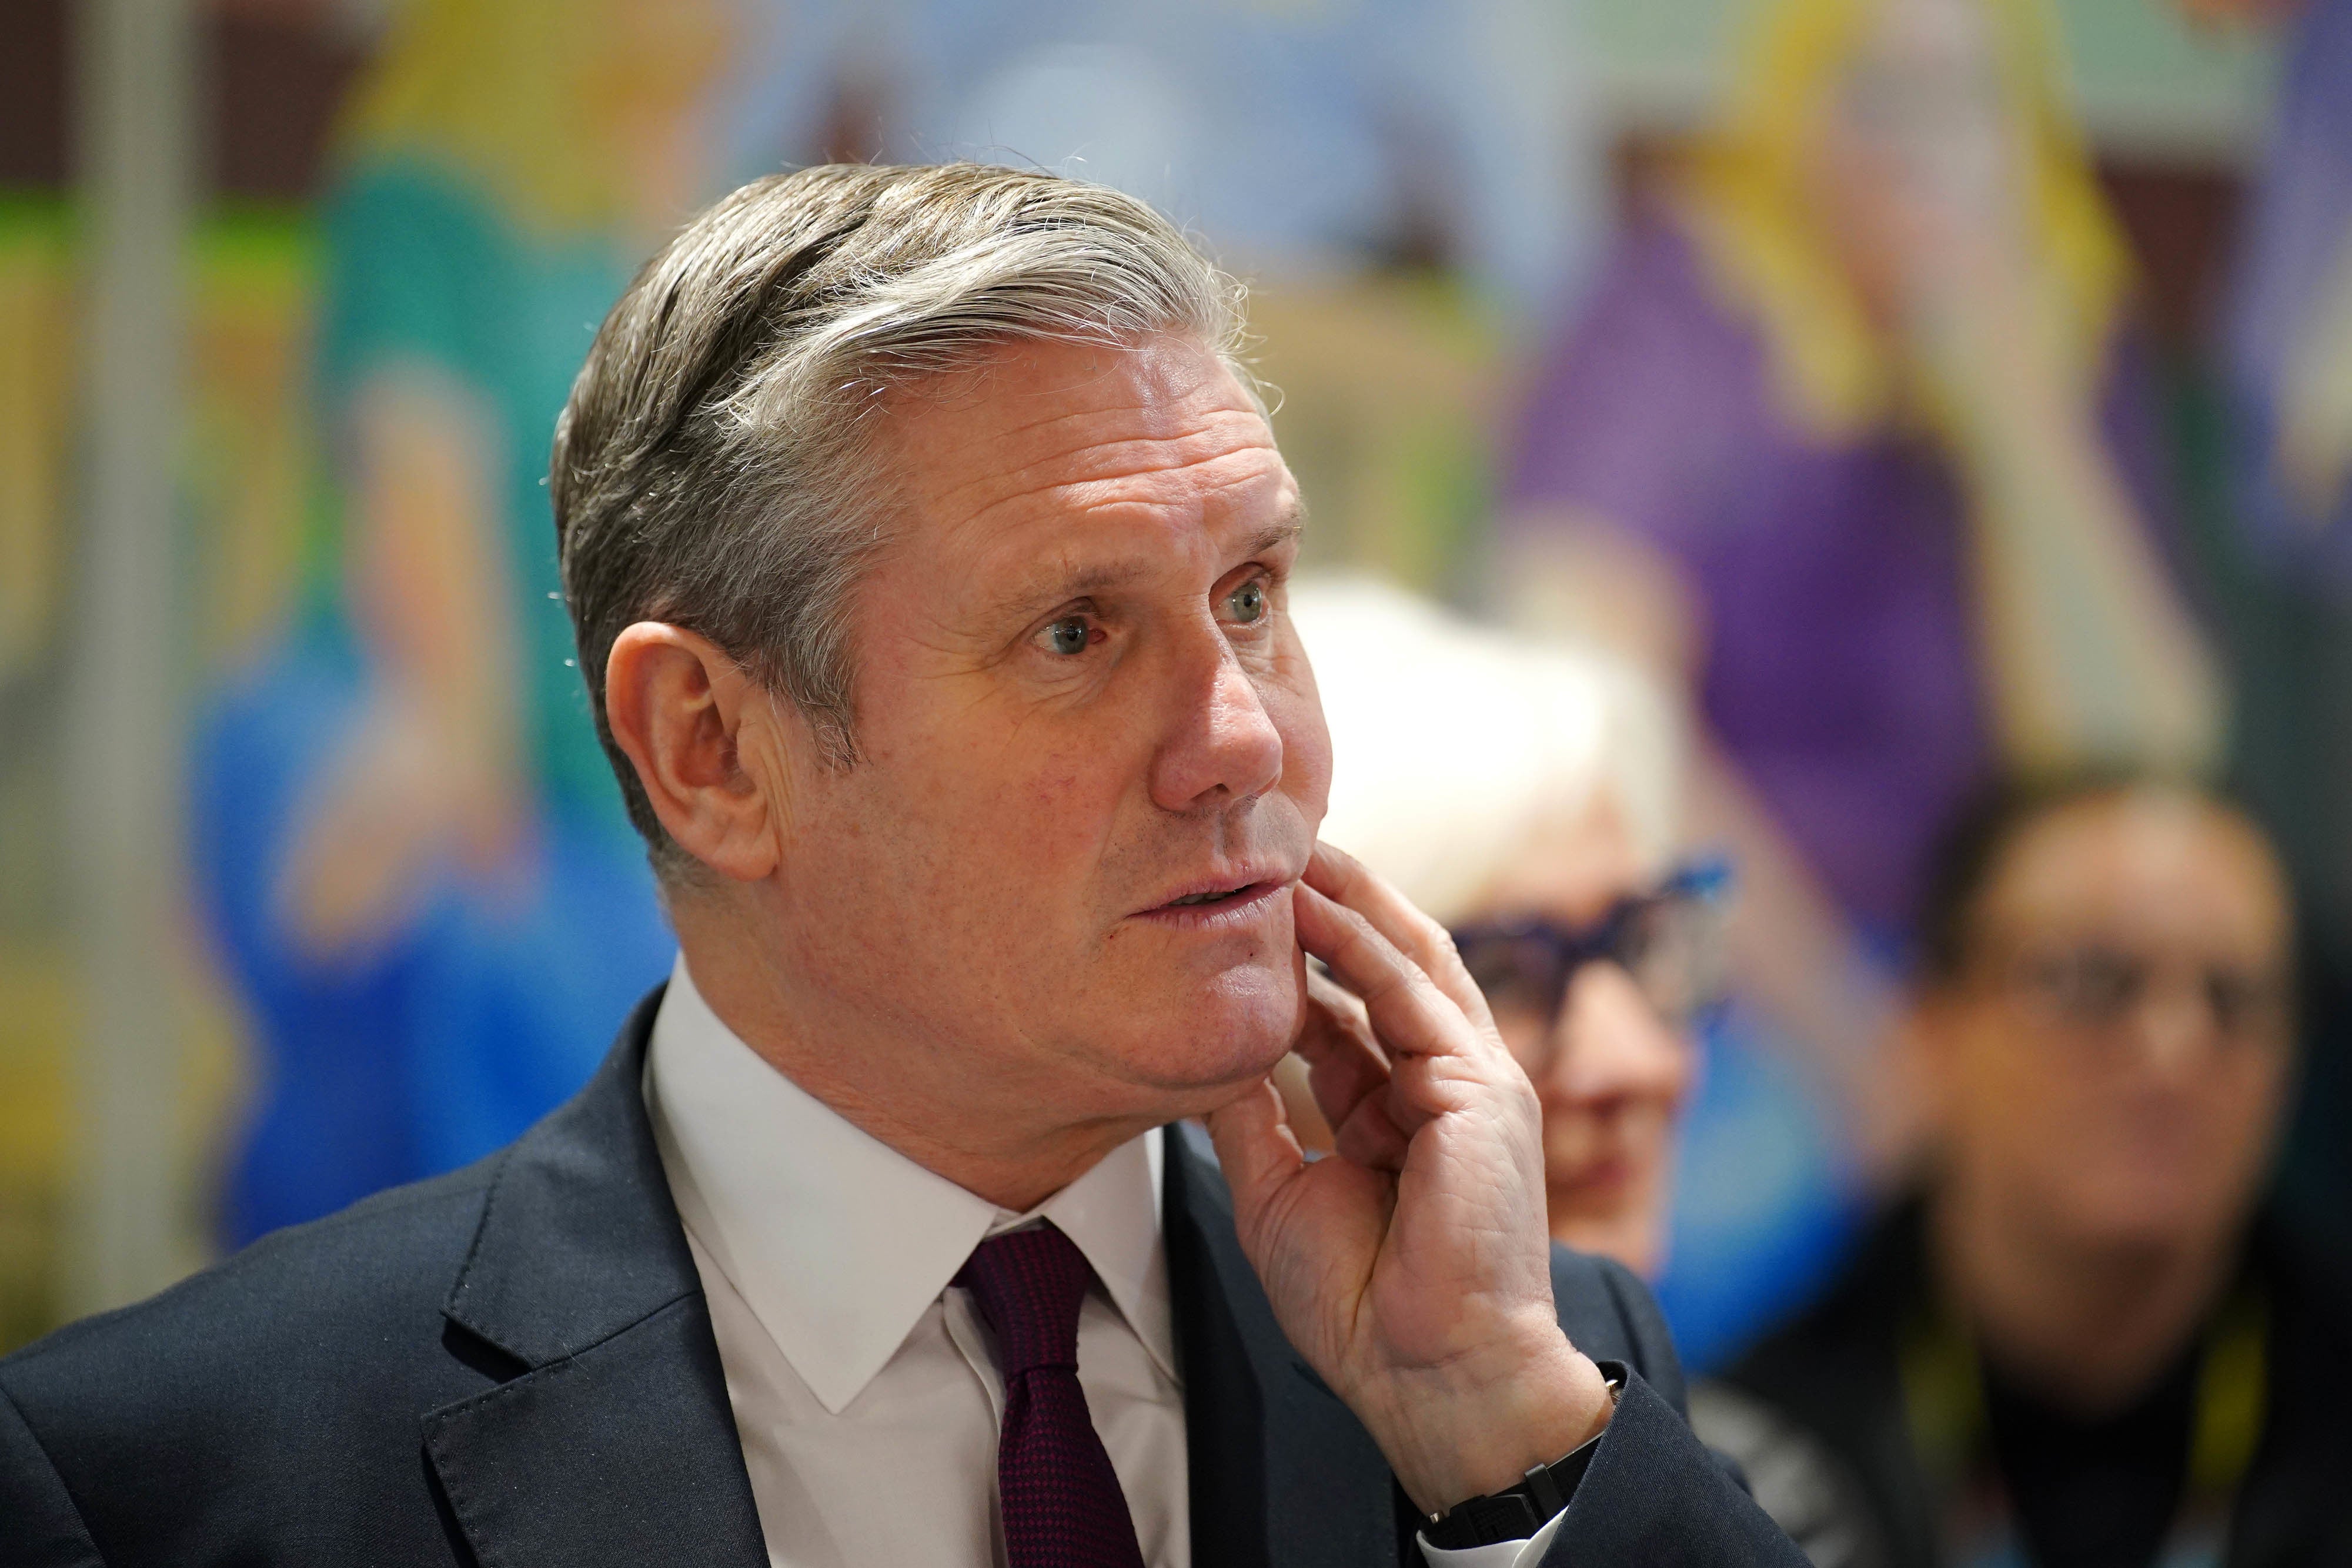 labour could win 100-seat majority, says former blair adviser as brexit voters turn to starmer